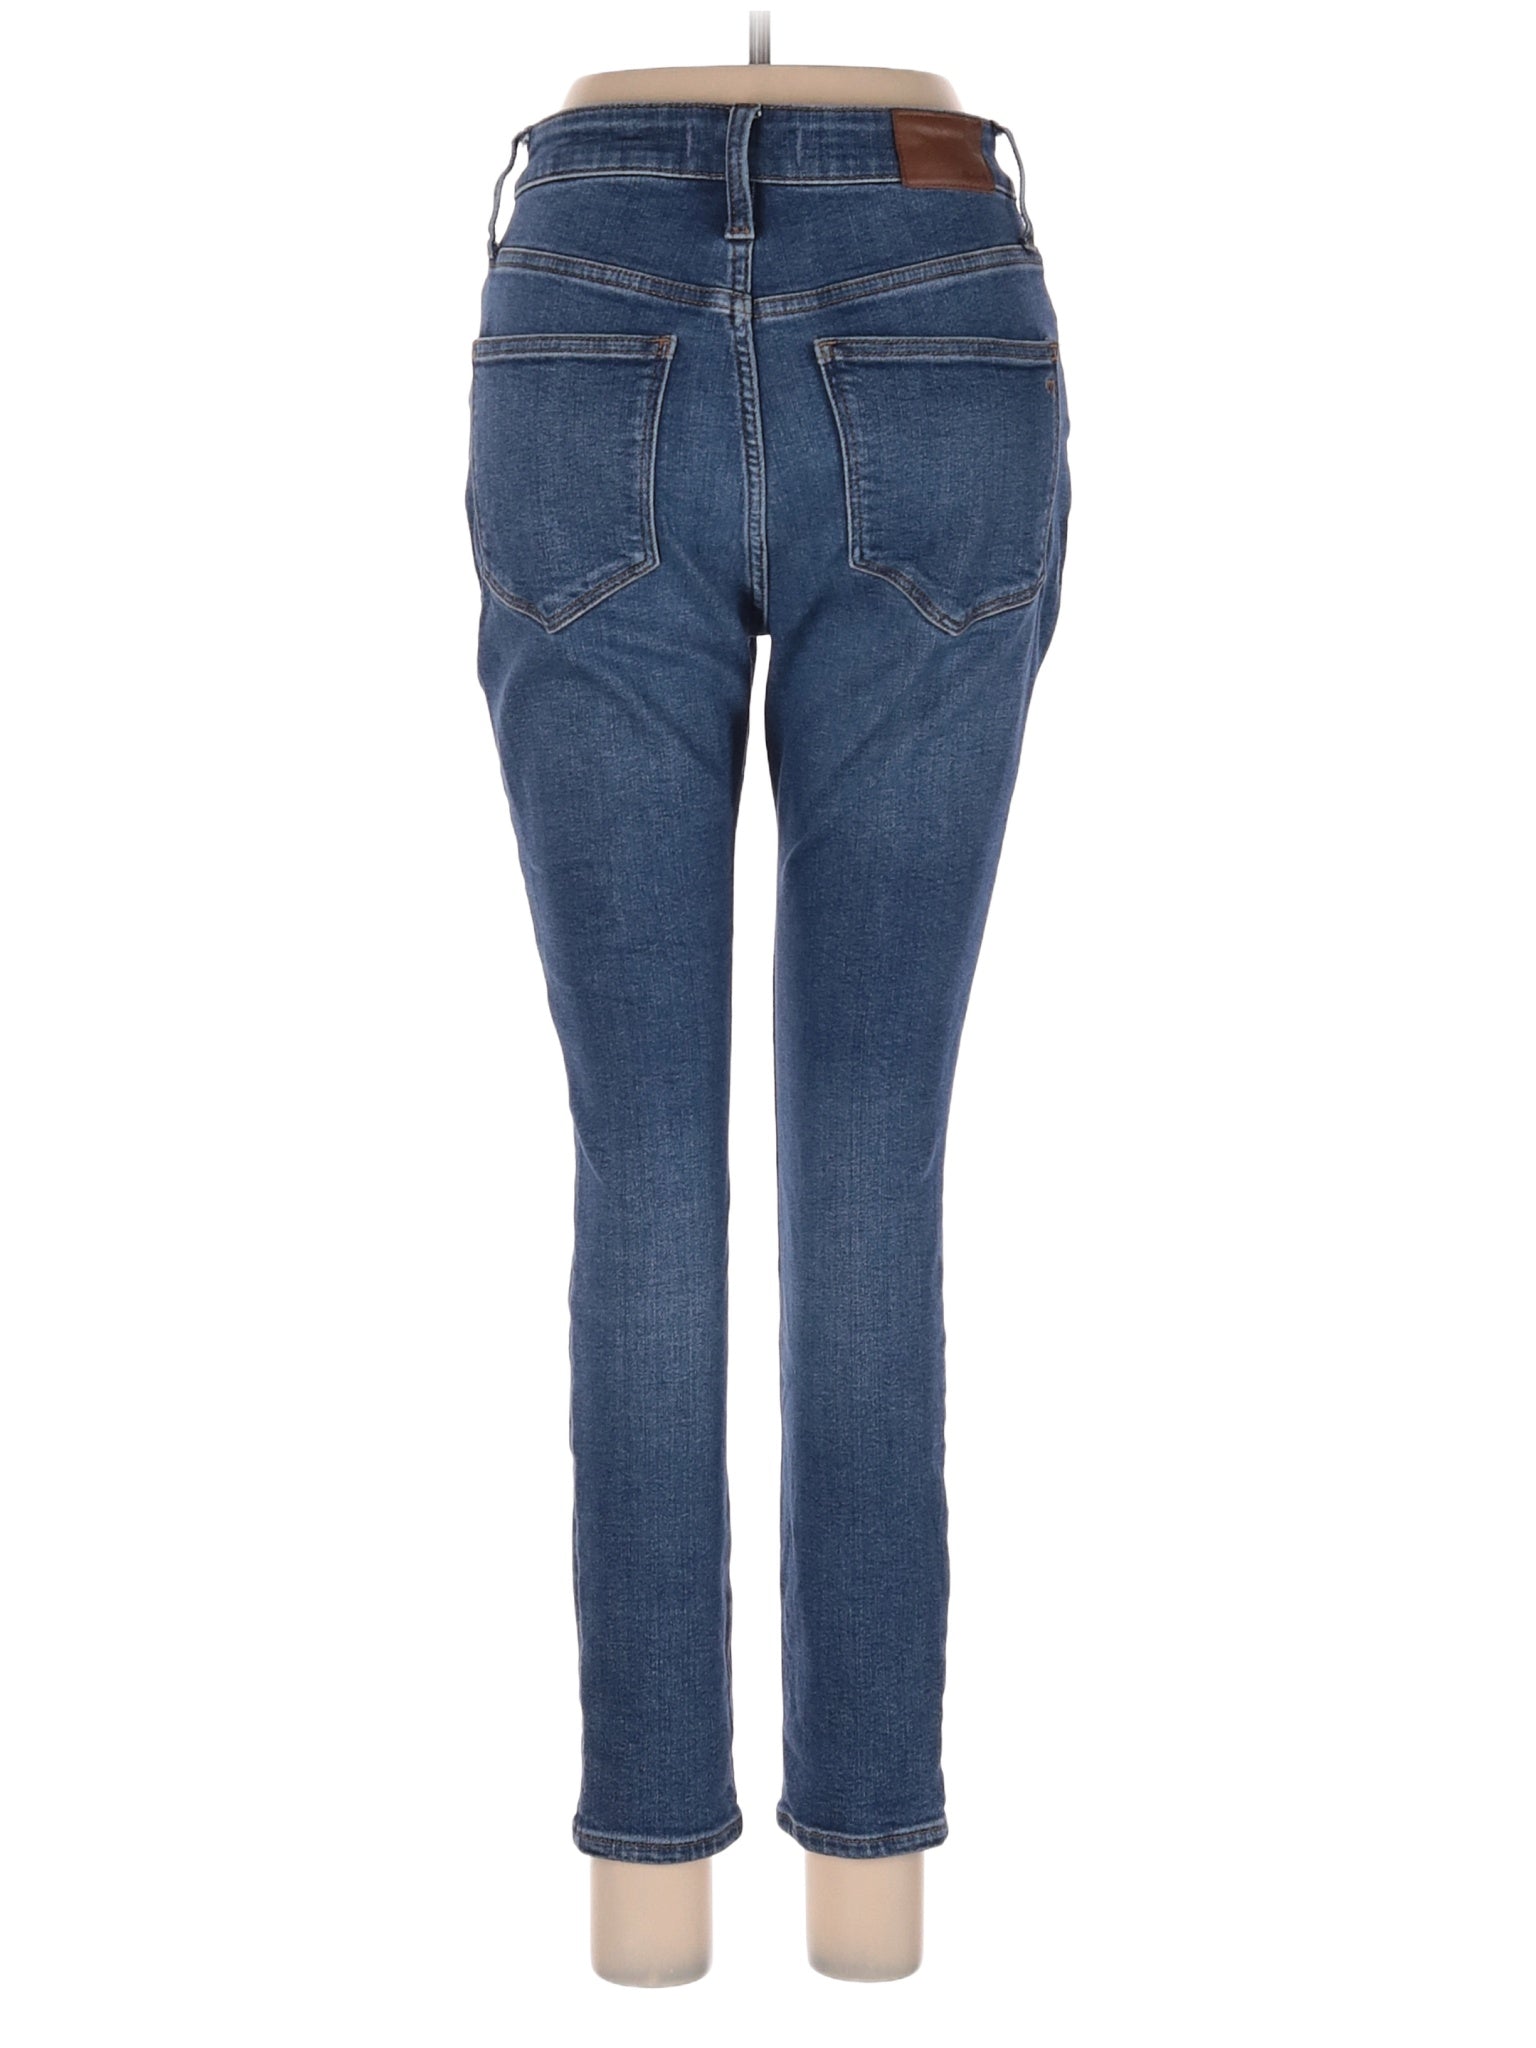 High-Rise Skinny Petite Curvy High-Rise Skinny Jeans In Wendover Wash: TENCEL&trade; Denim Edition in Dark Wash waist size - 26 P